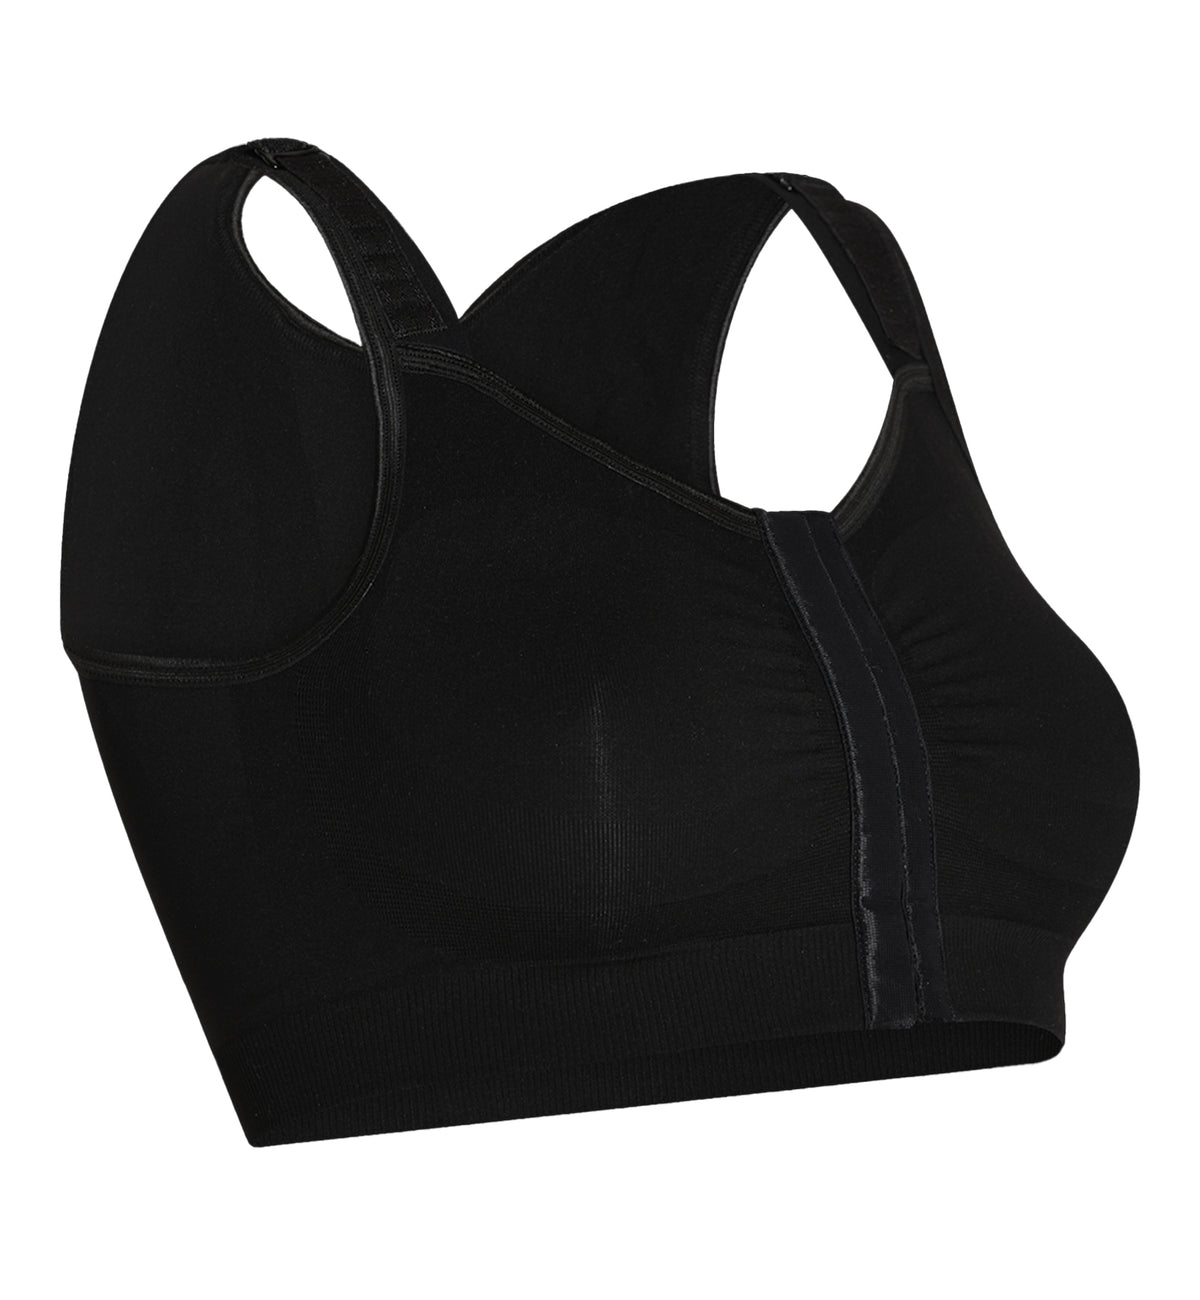 Carefix Bree Post-Op Wire Free Front Close Recovery Bra (3831),Small,Black - Black,Small